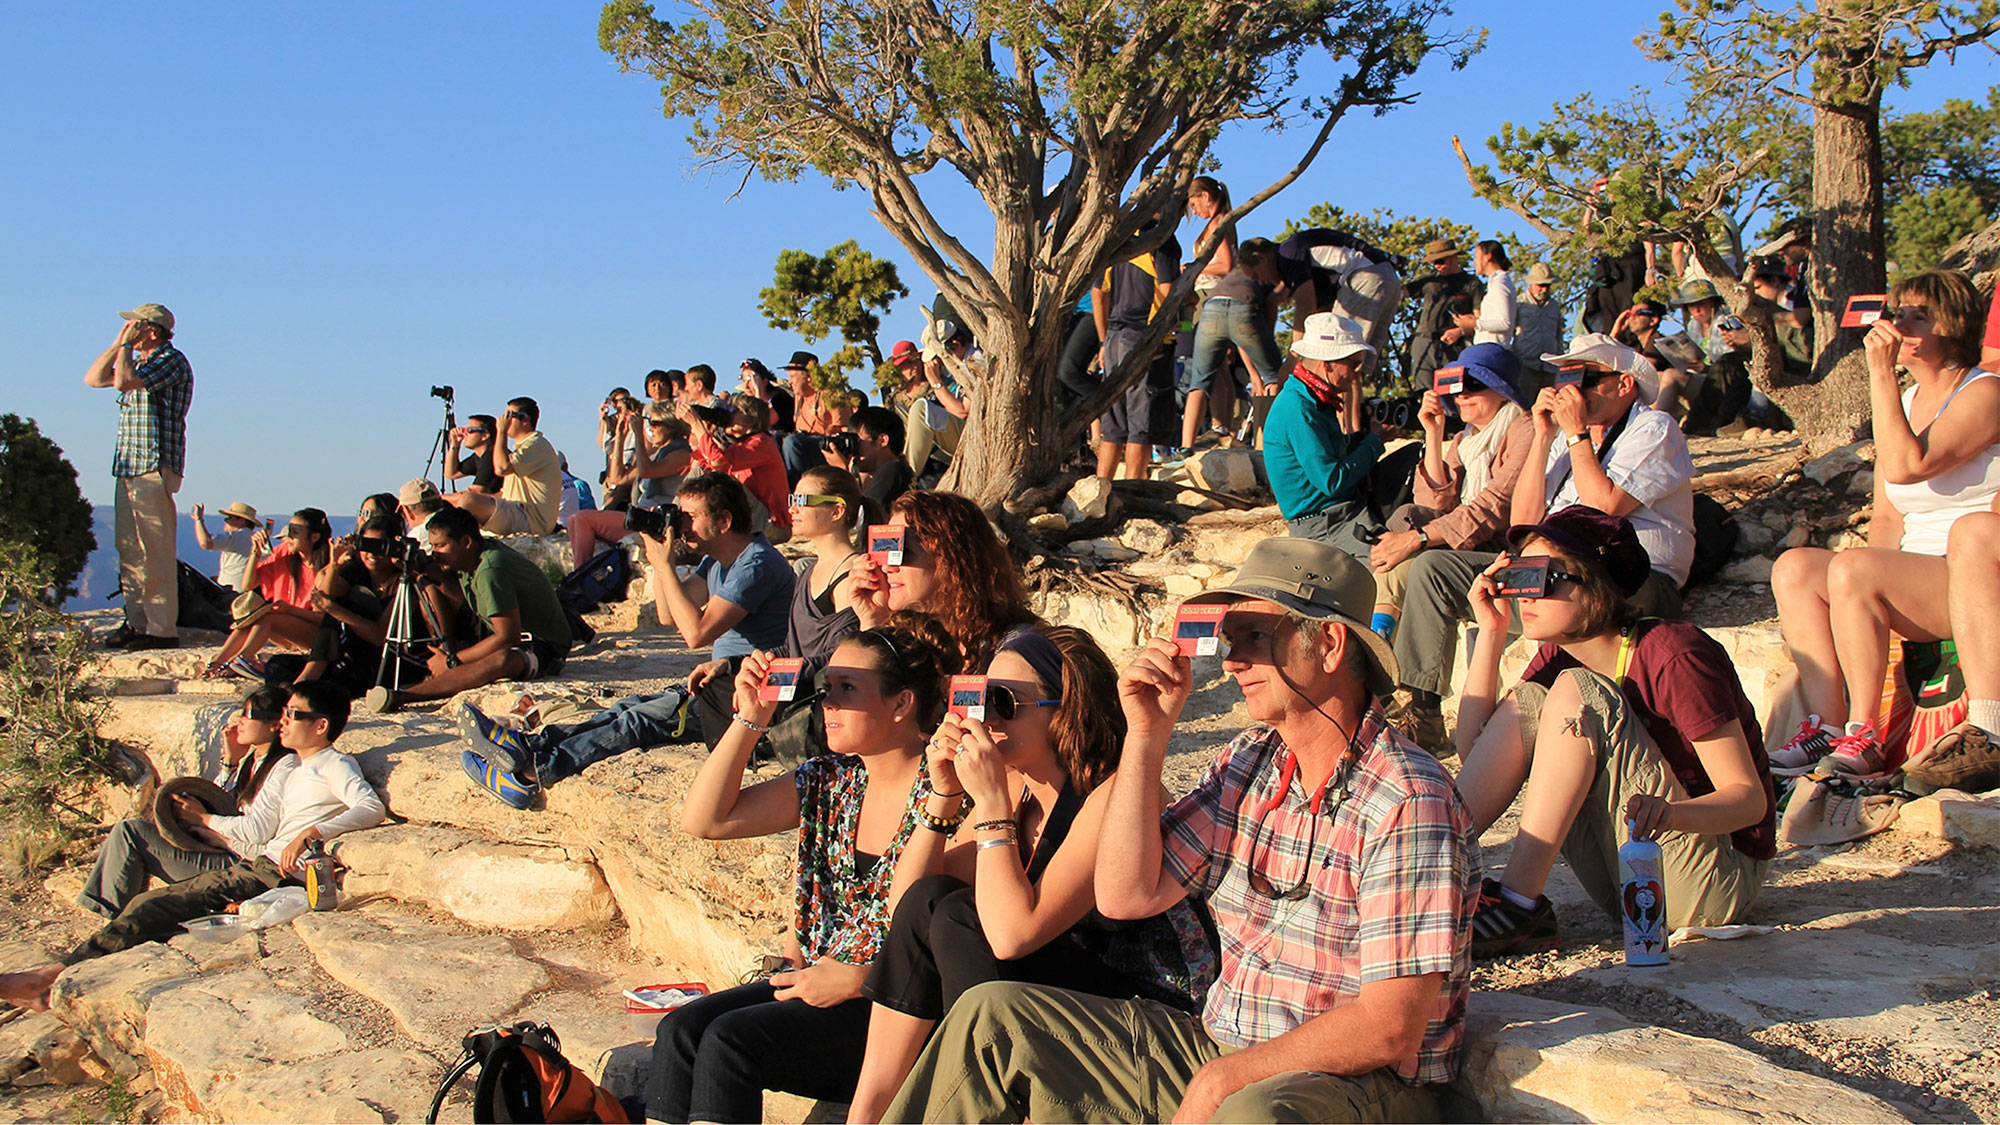 Dozens of people sit or stand outside on a rocky slope and all face the same direction (left) while holding card shaped solar viewers or while wearing solar eclipse glasses. It is a sunny day with a blue sky and trees in the background.